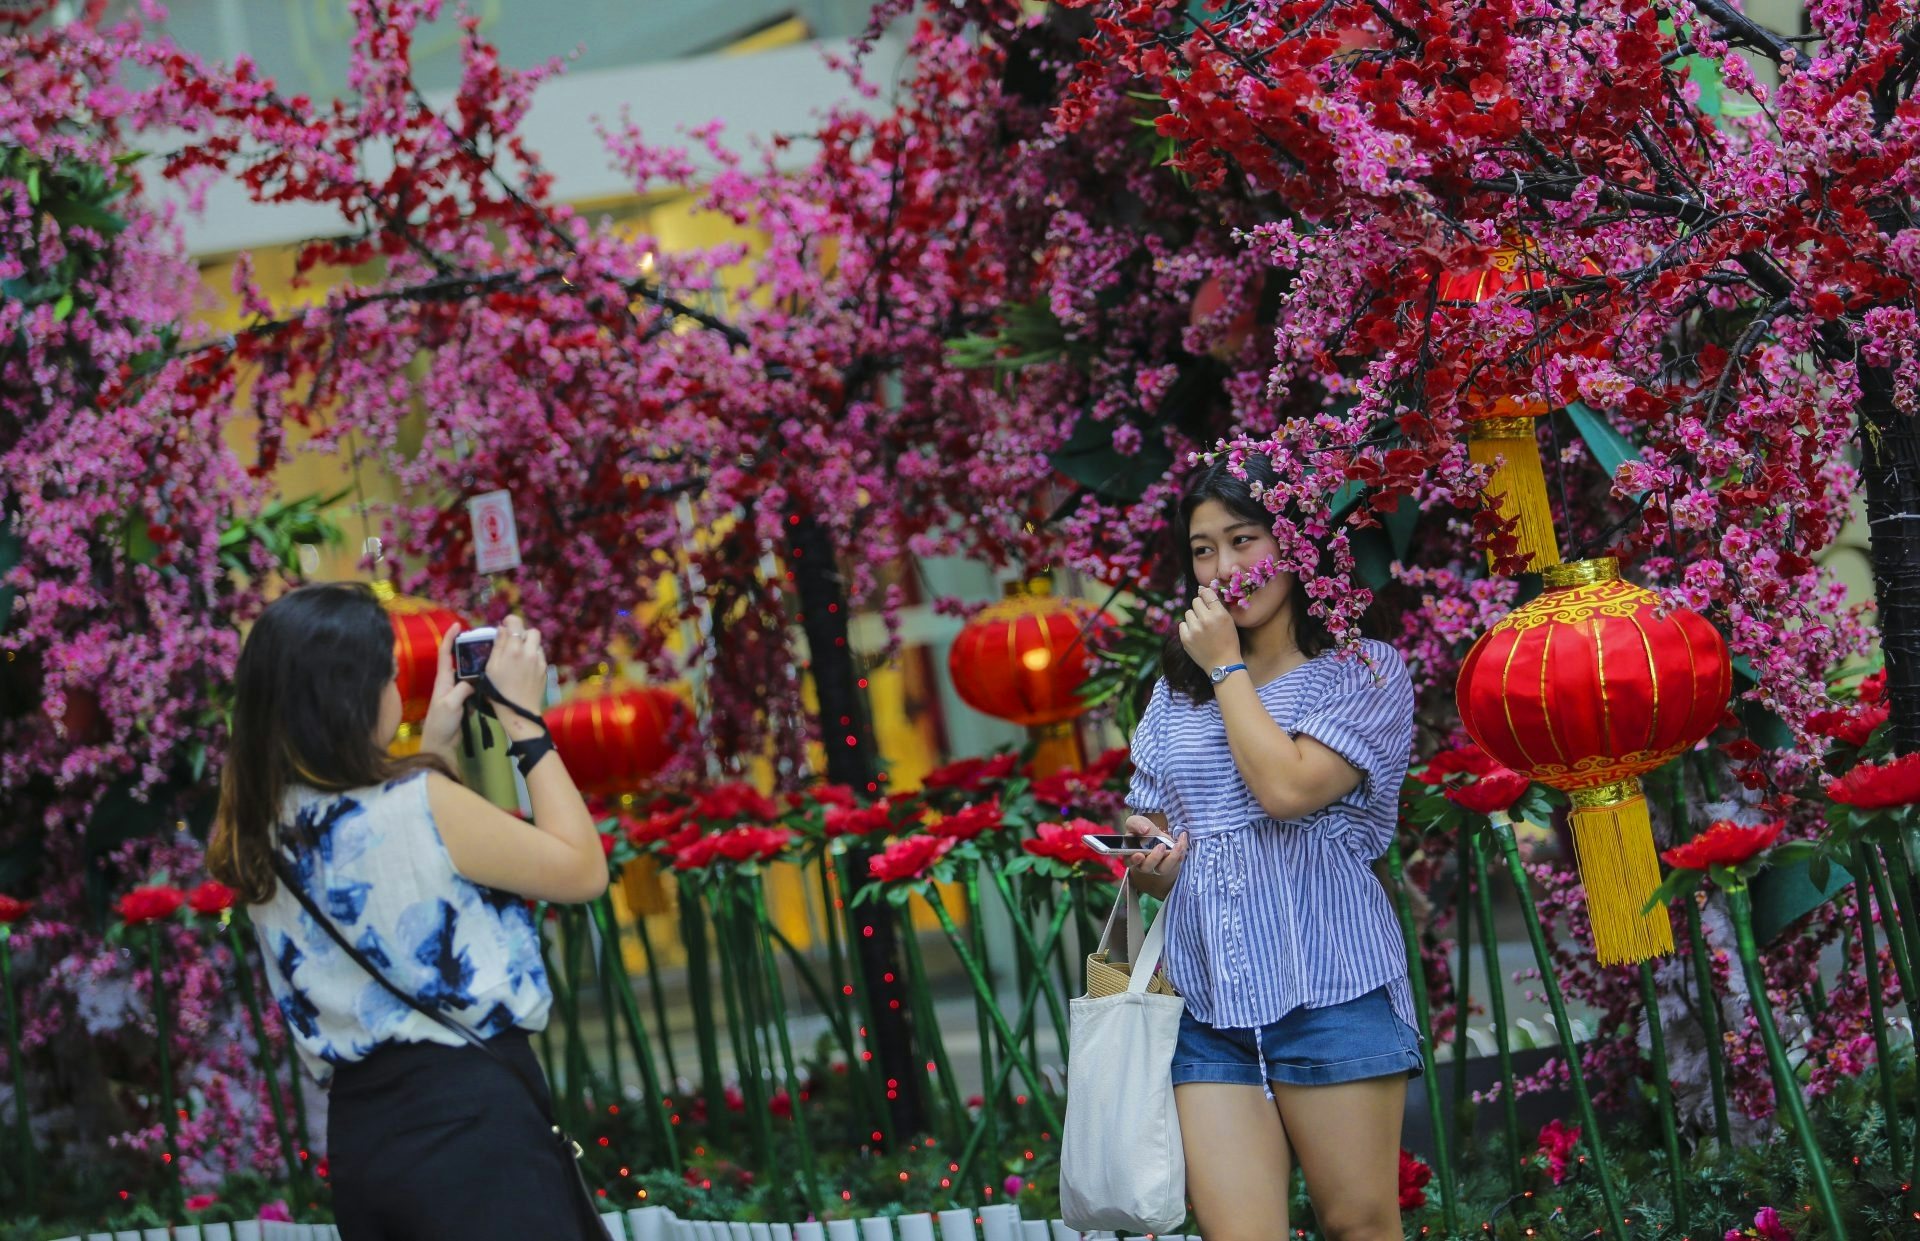 A growing number of Chinese people are taking the opportunity to spend the Chinese New Year holiday abroad. (Abdul Razak Latif/Shutterstock)